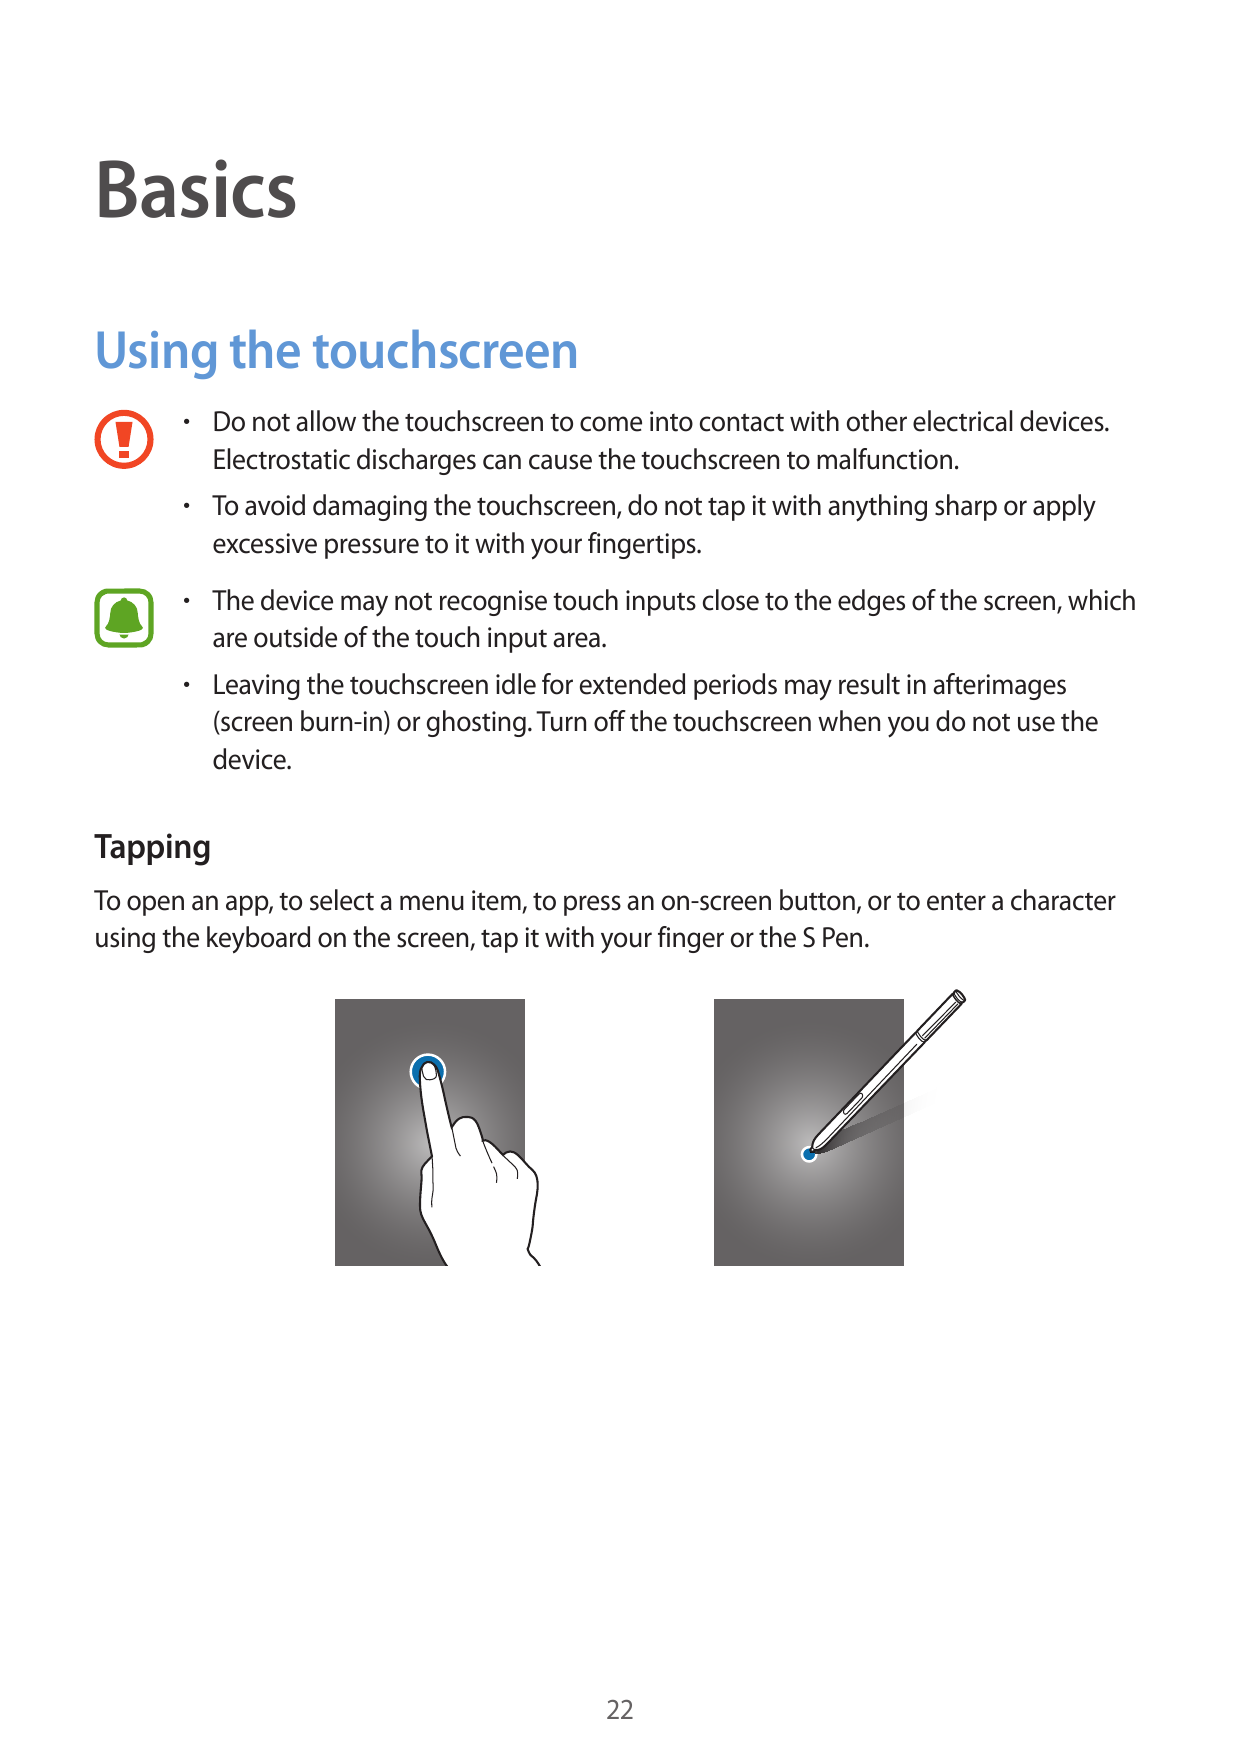 BasicsUsing the touchscreen• Do not allow the touchscreen to come into contact with other electrical devices.Electrostatic disch